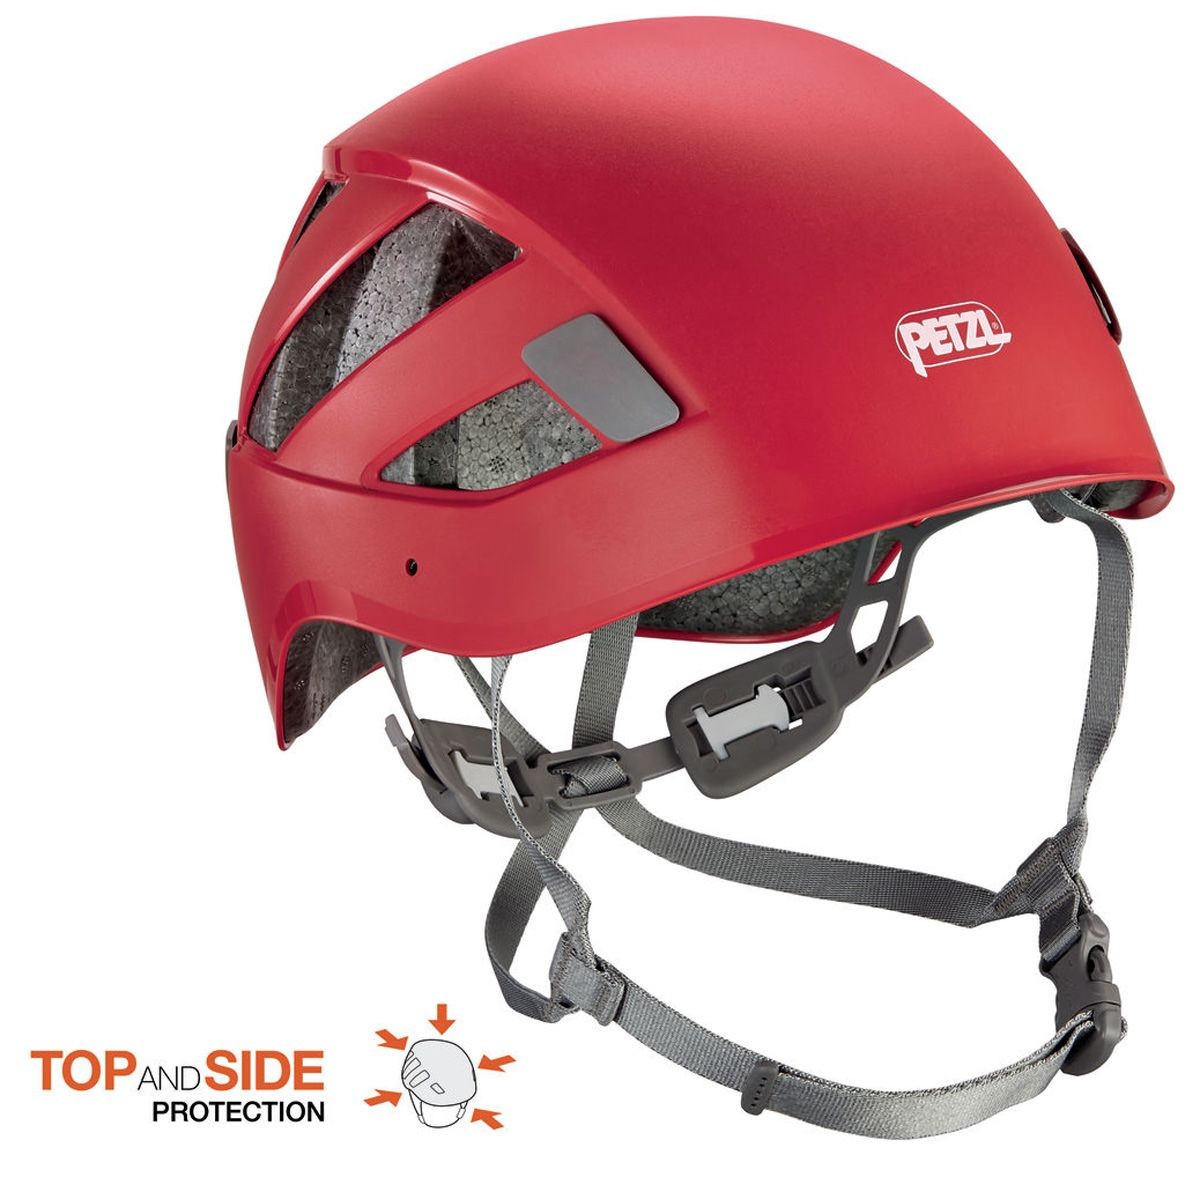 Petzl Boreo, con Top And Side Protection